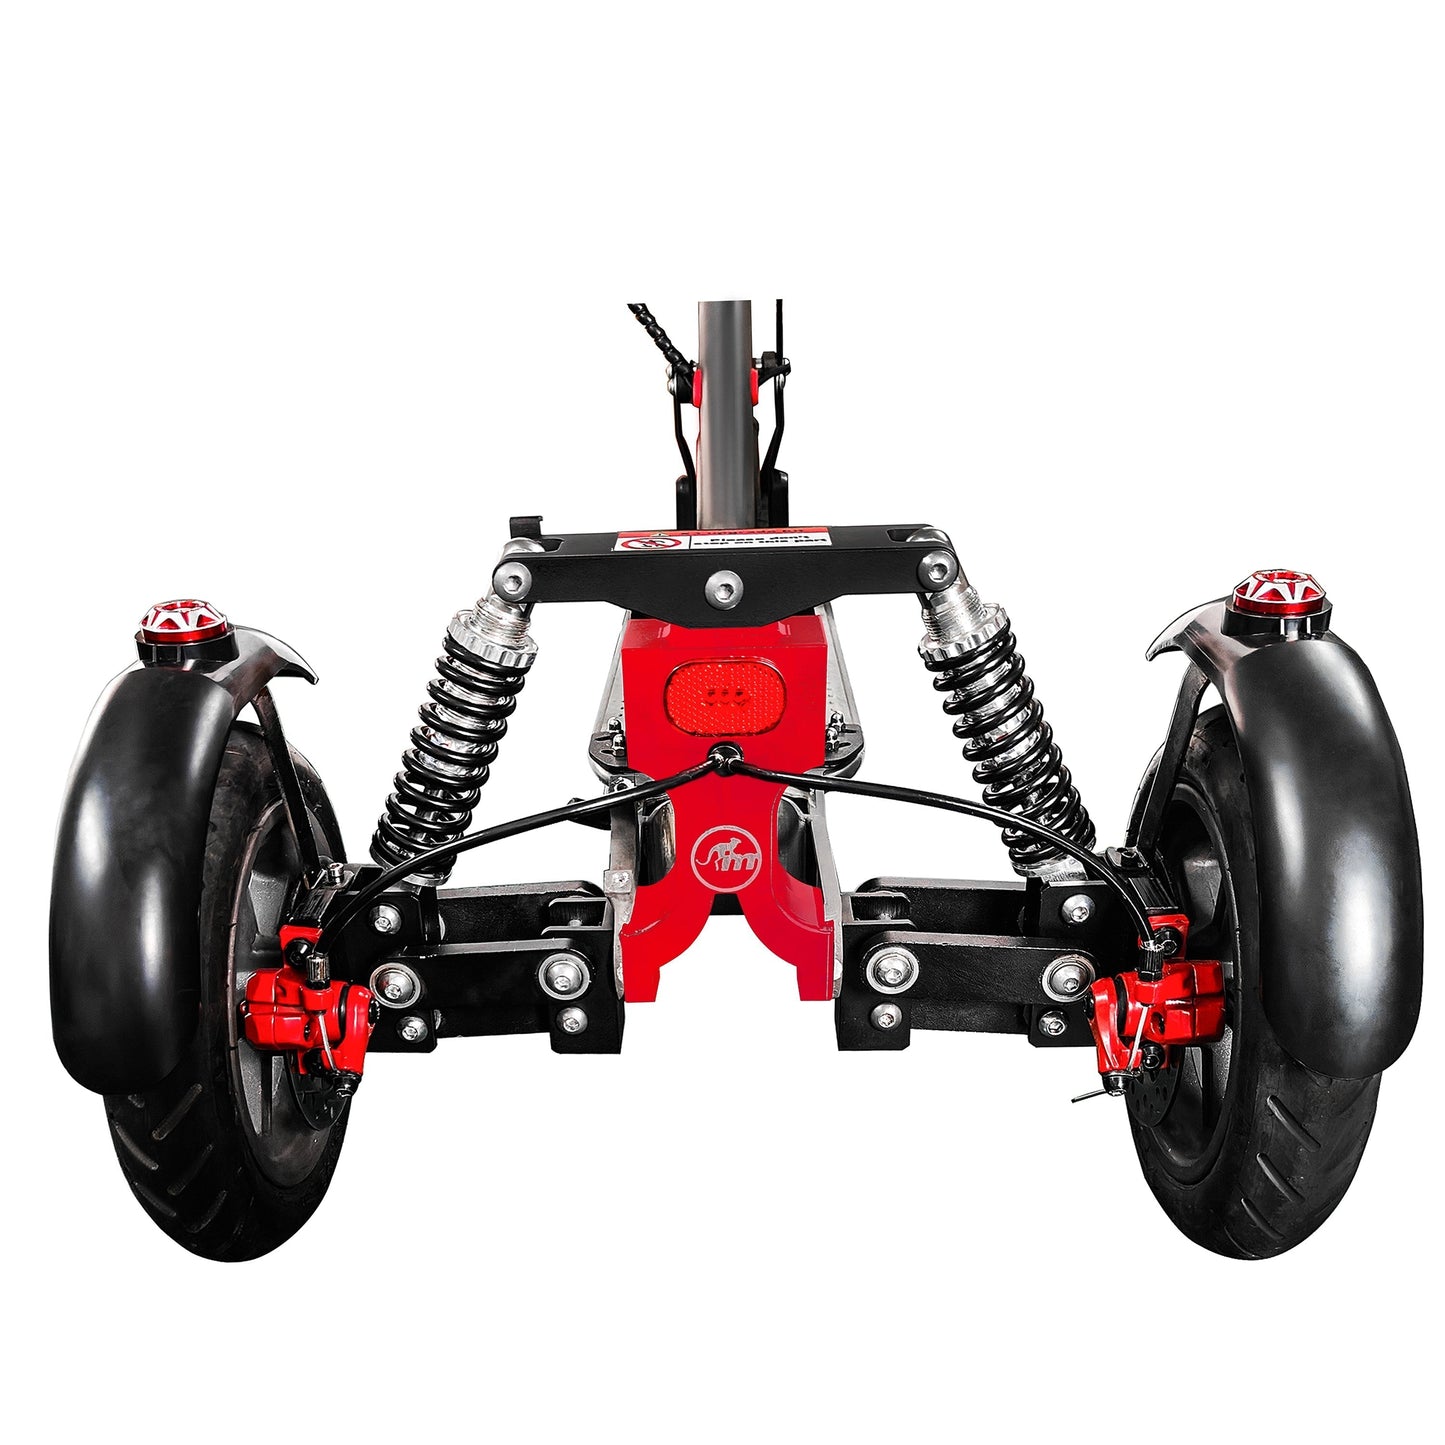 Monorim X3 upgrade kit to be Three wheels special for xiaomi pro2 Scooter